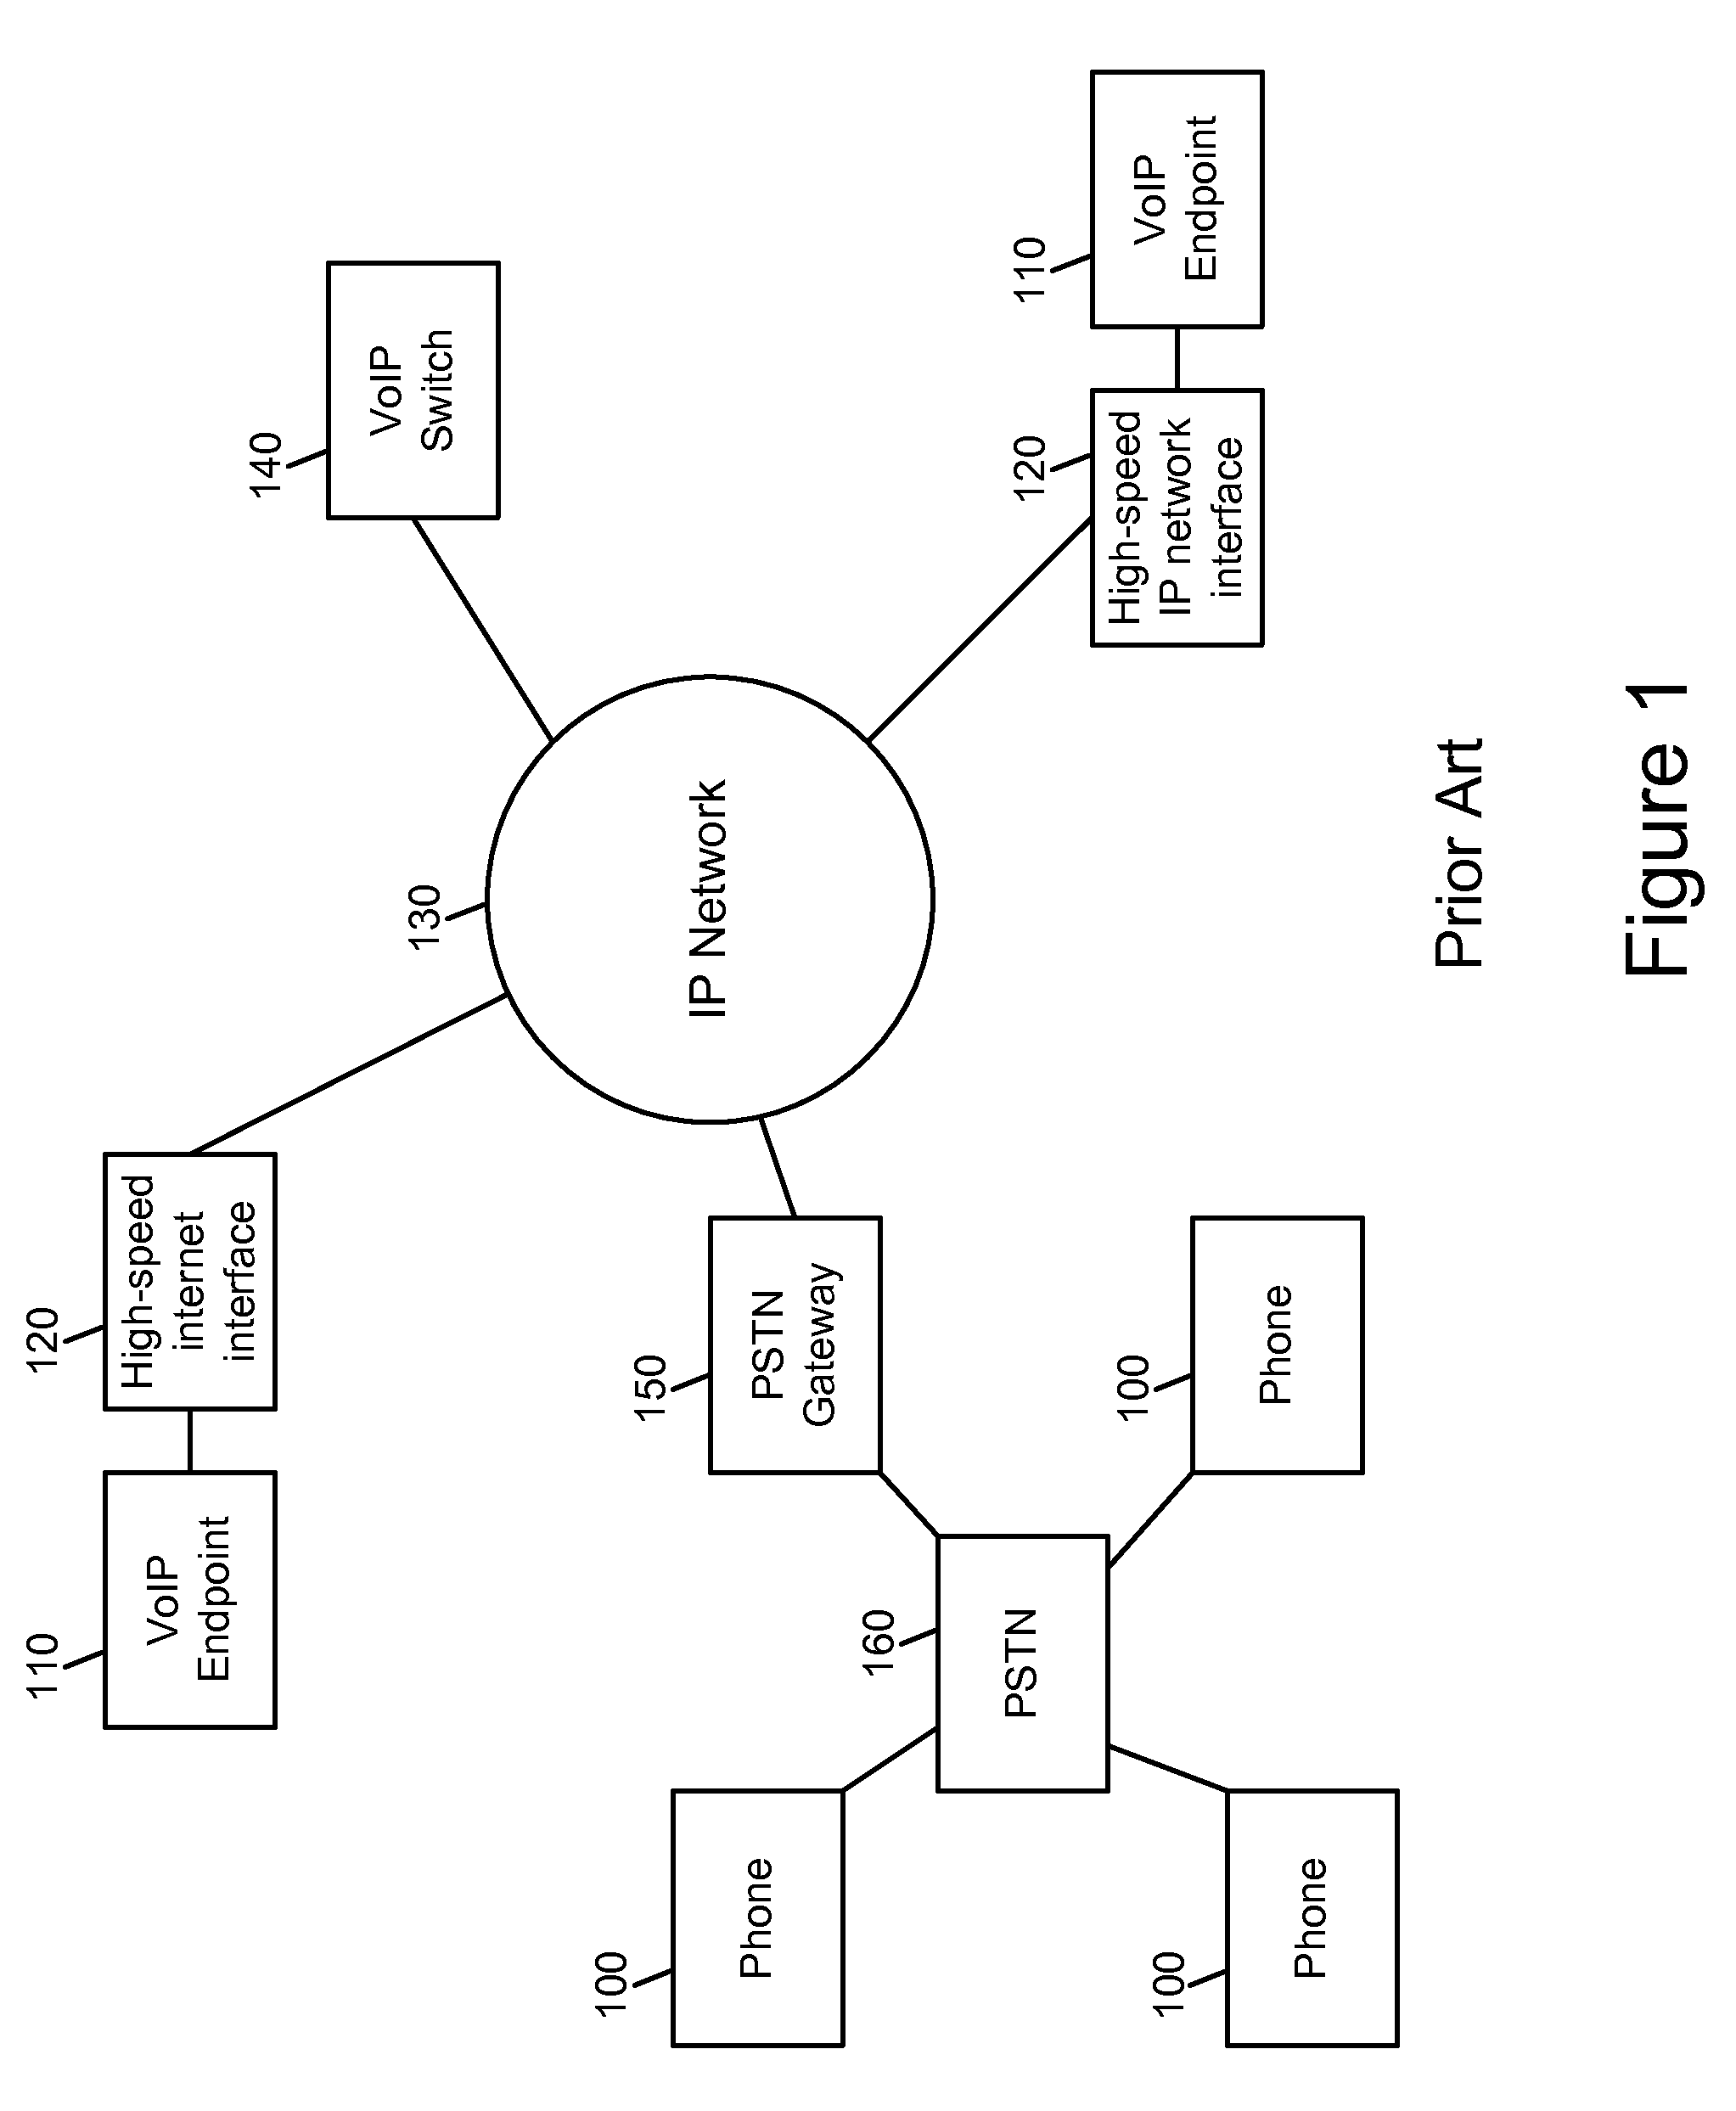 Power line communication voice over IP system and method